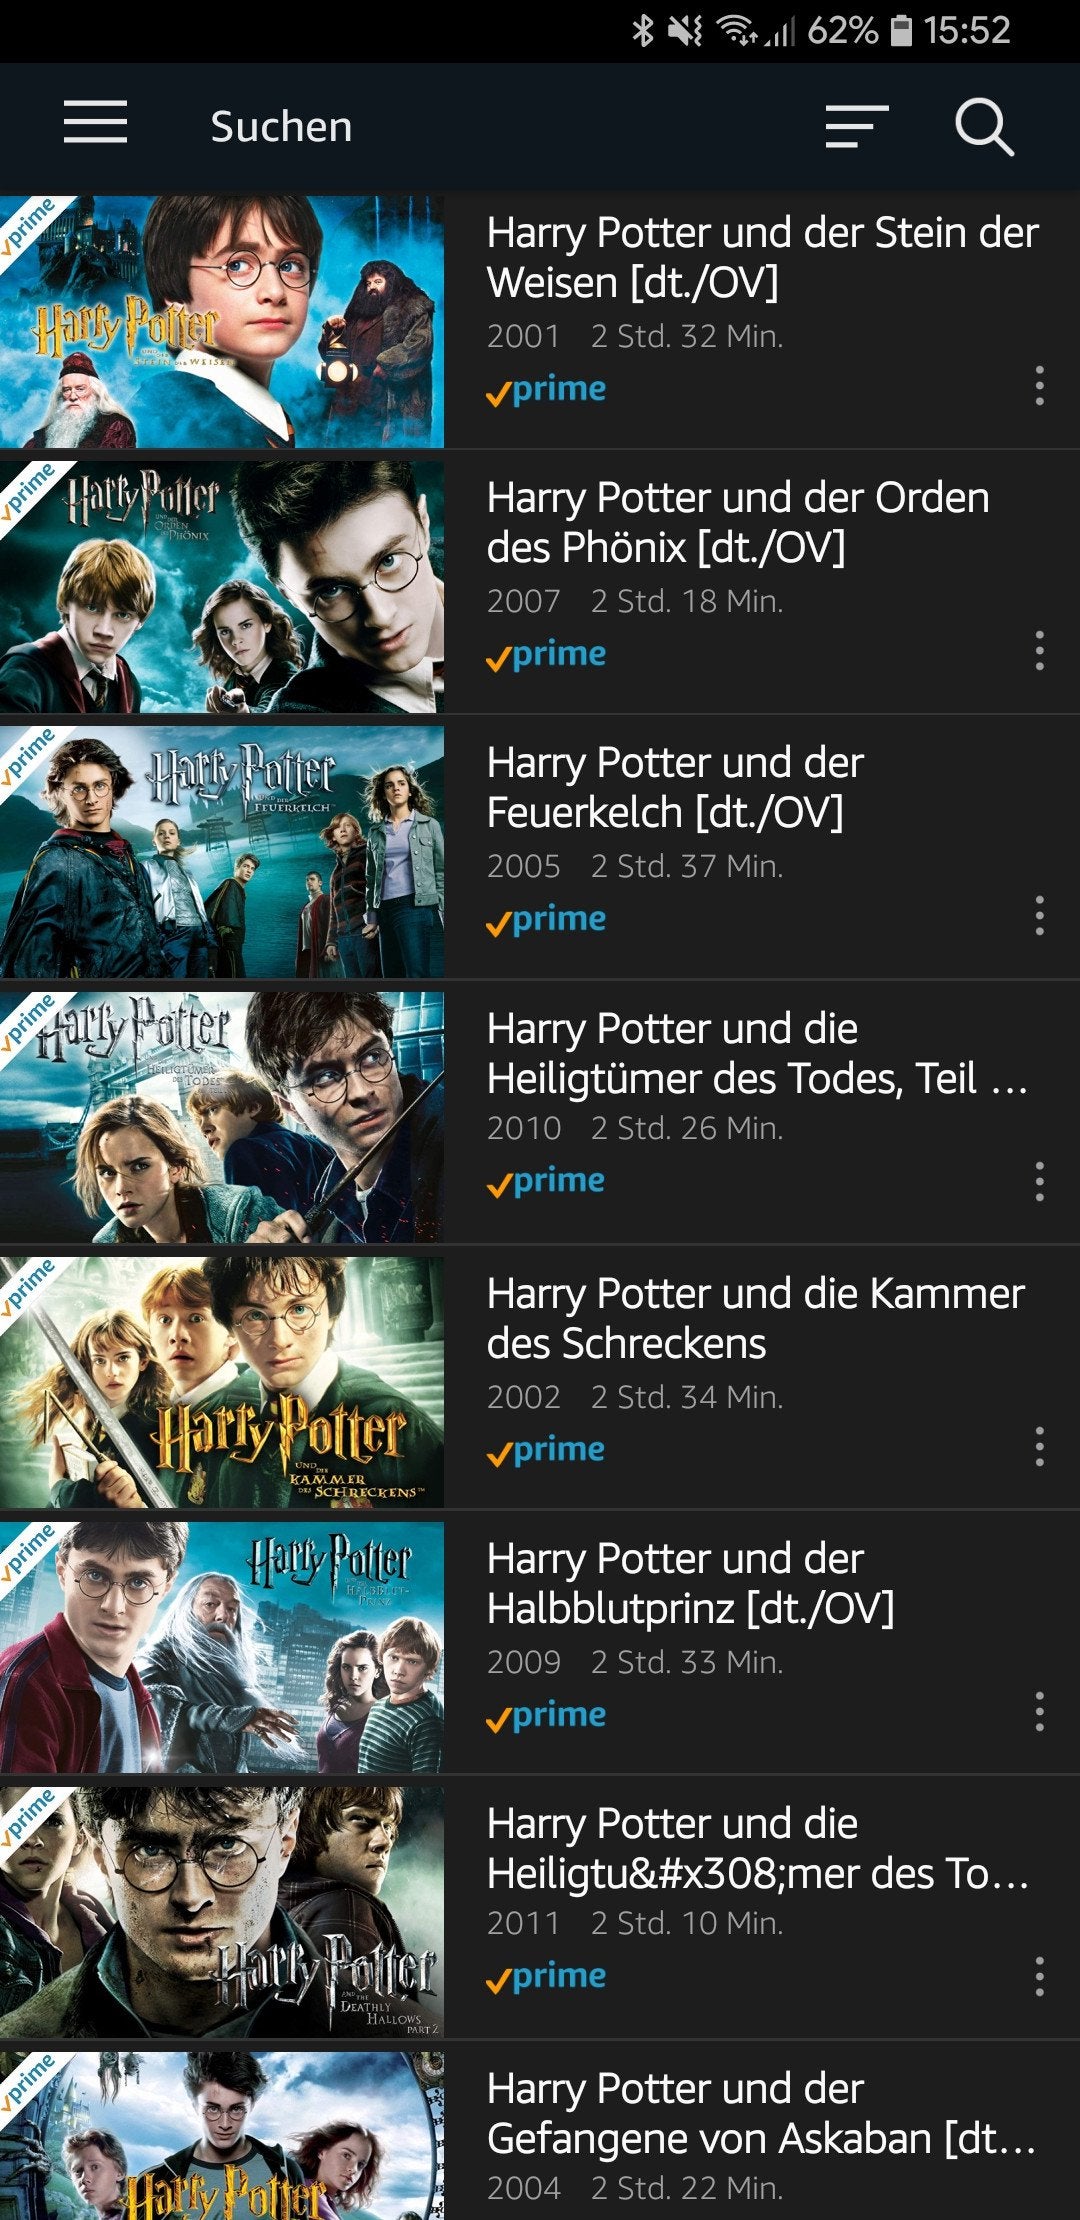 Are the Harry Potter movies available on Prime Video?